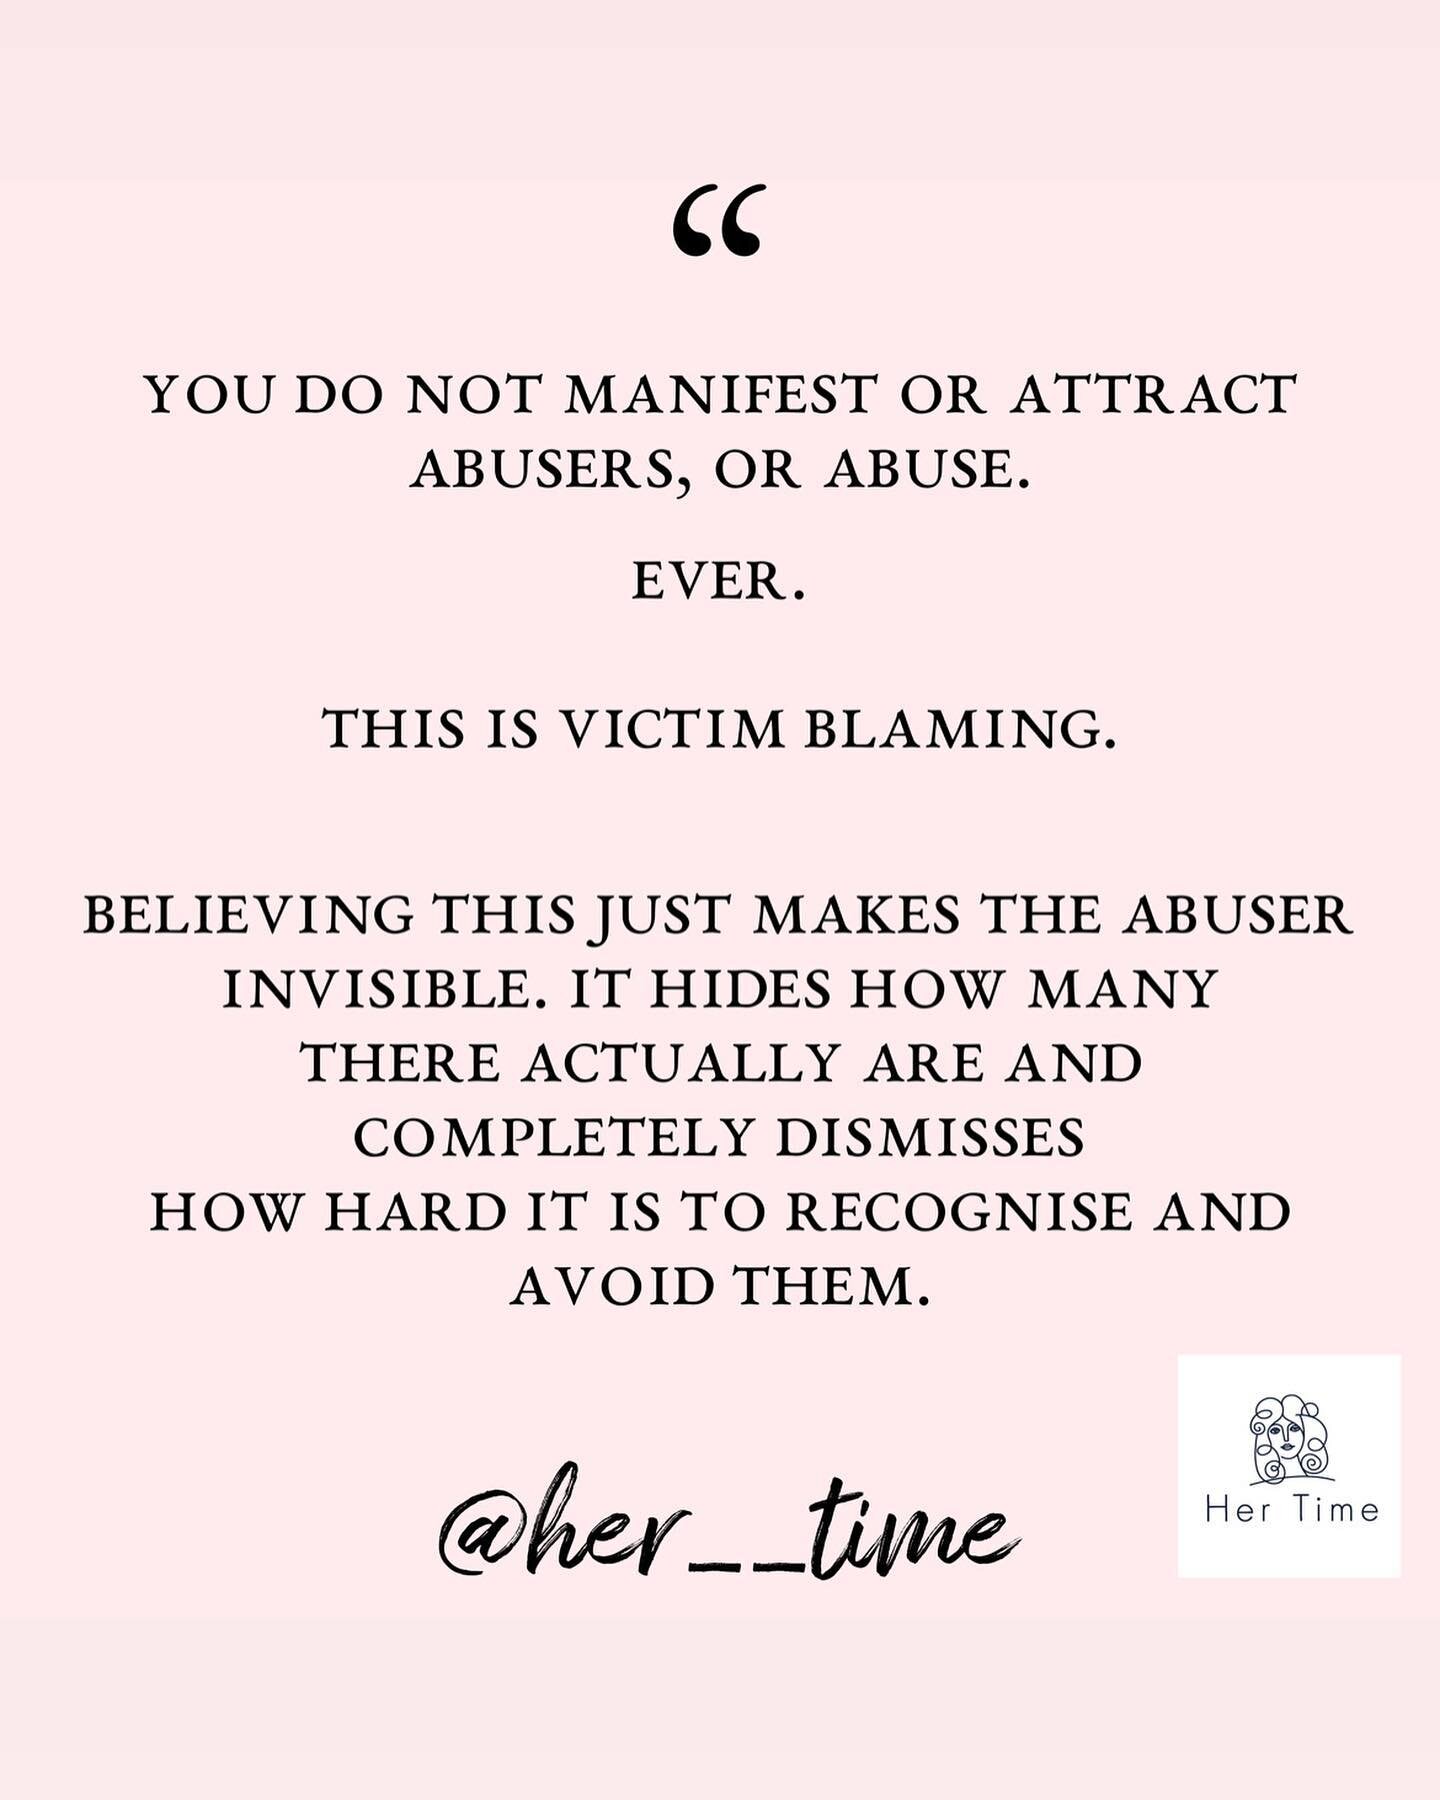 You do not manifest or attract 
abusers, or abuse. 

EVER.

This is victim blaming. 

Believing this just makes the abuser
invisible. 

It hides how many there actually are and completely dismisses how hard it is to recognise and avoid them. 

Many a